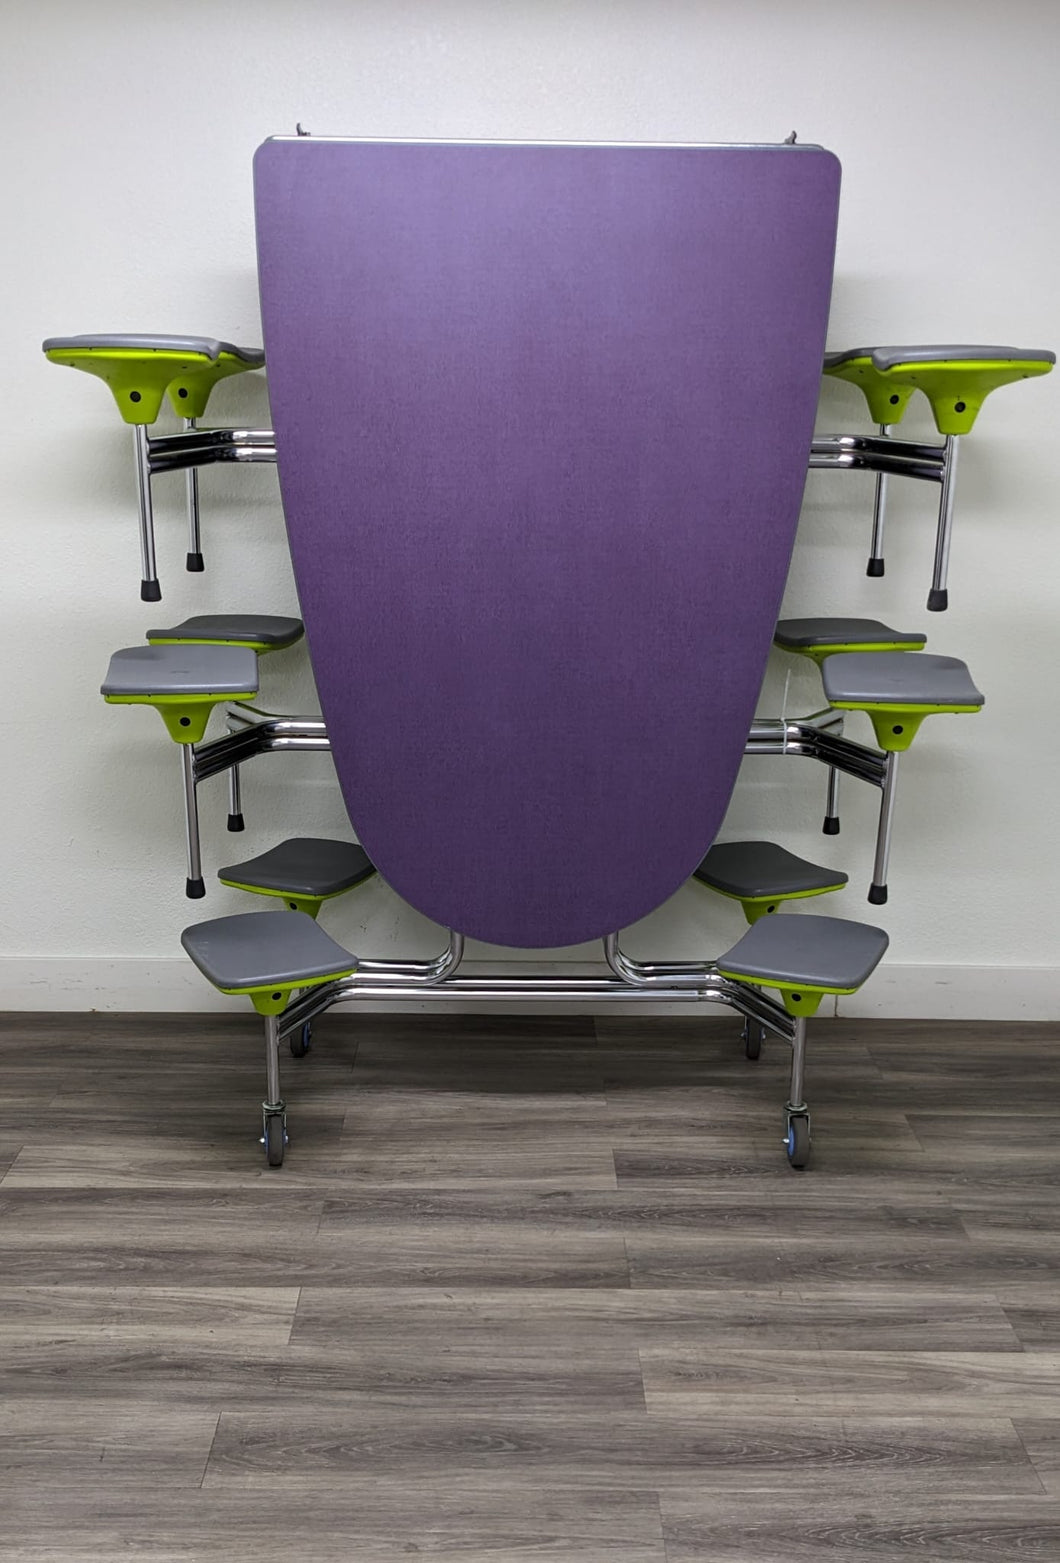 10ft Cafeteria Lunch Table w/ 12 Stool Seat, Purple Top, Gray Top/Green Base Seat, Oval, Adult Size (RF)